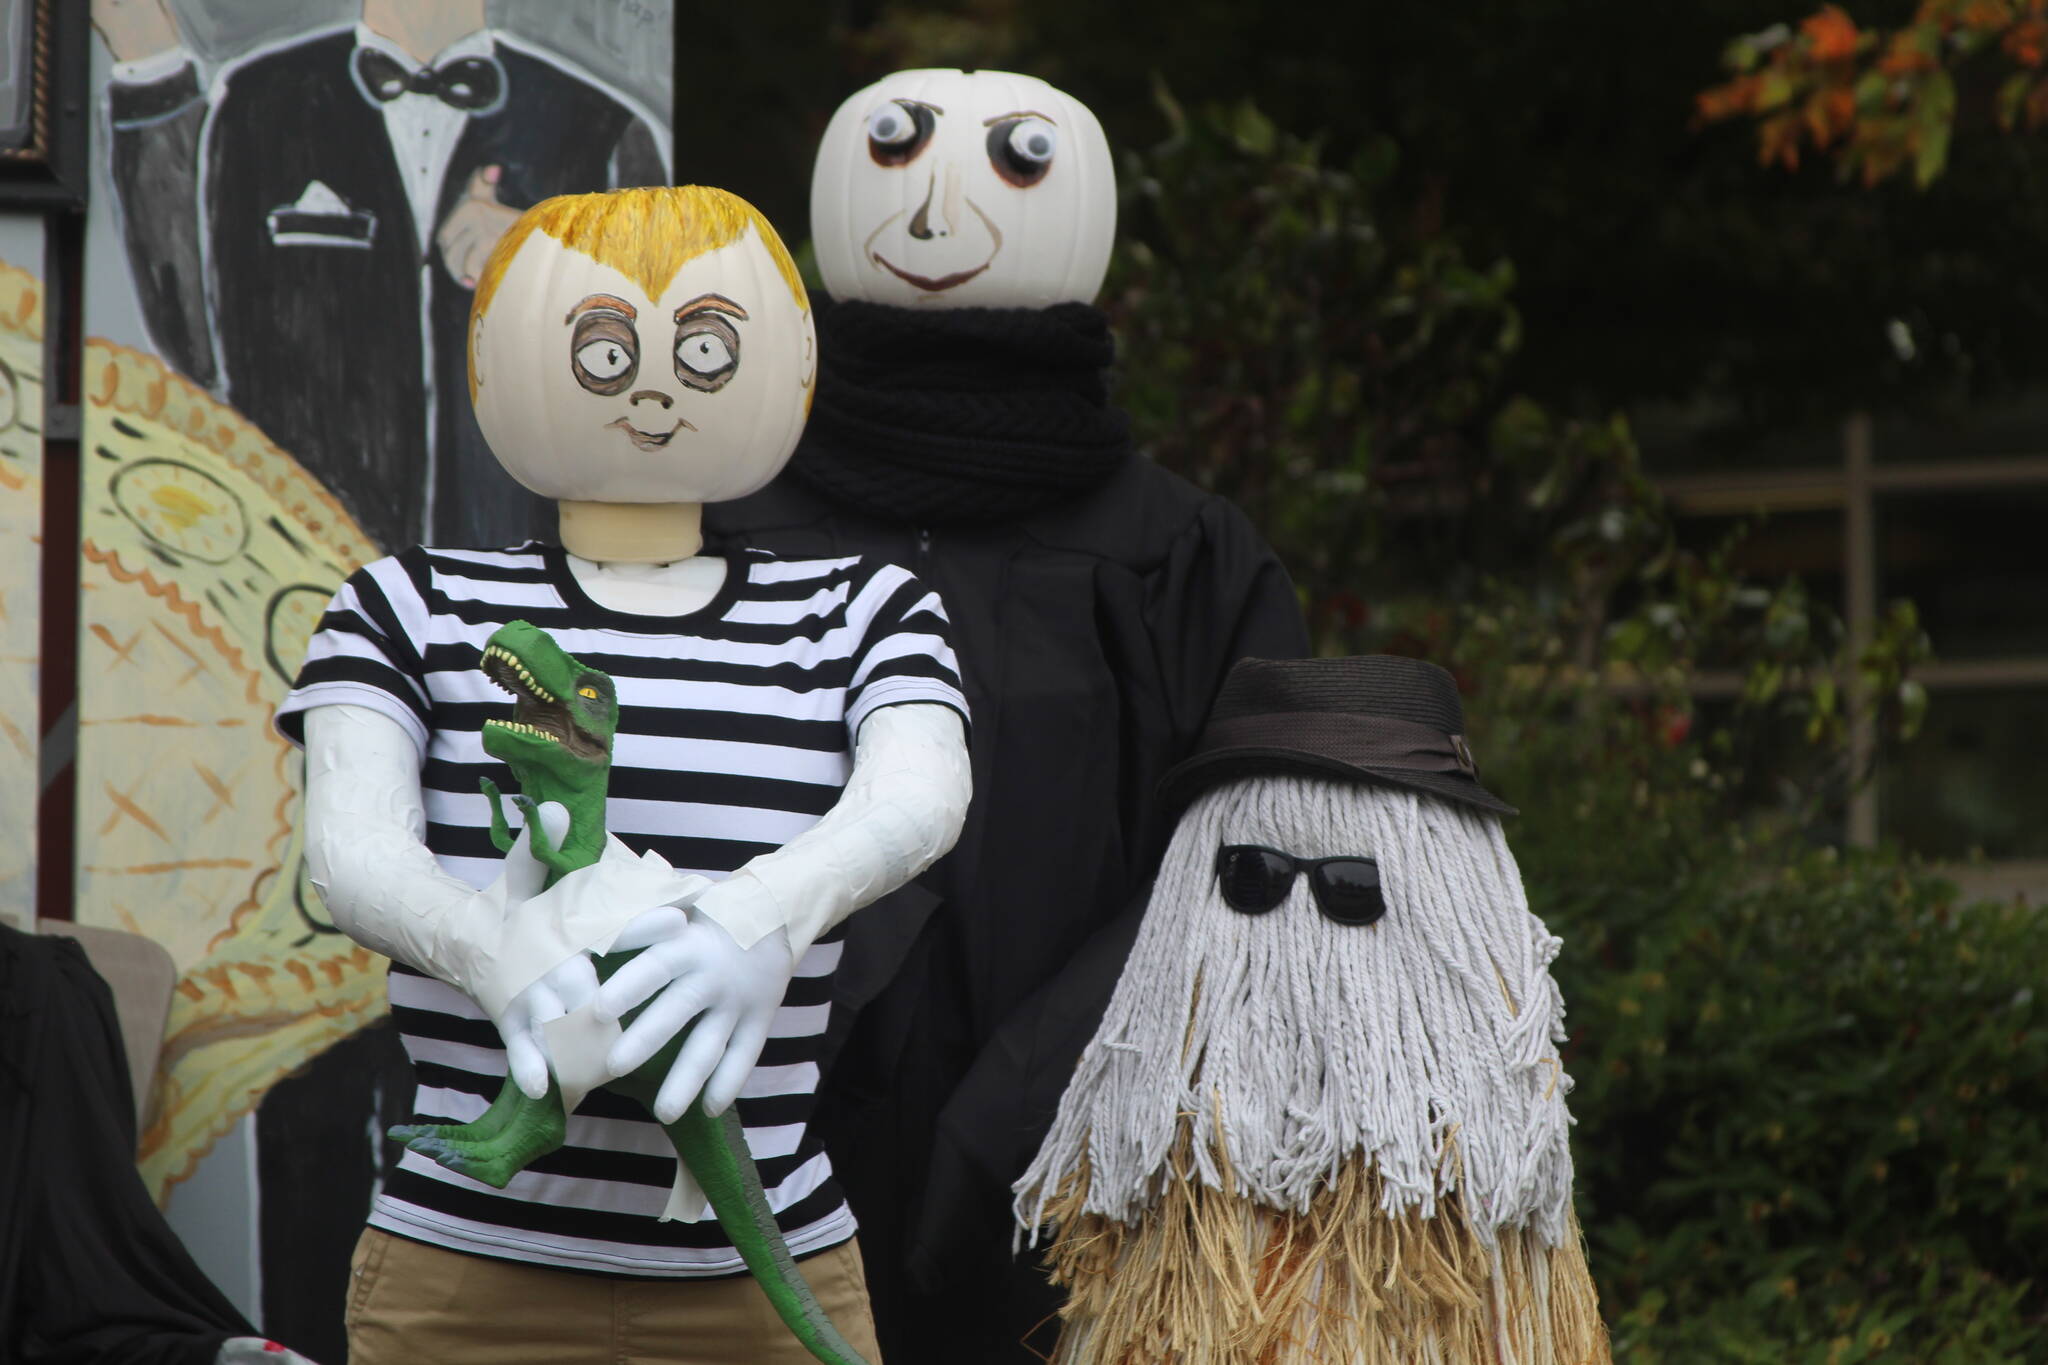 The Coupeville Lions Club put up a scarecrow display near the corner of Main Street and Highway 20. (Photo by Karina Andrew/Whidbey News-Times)